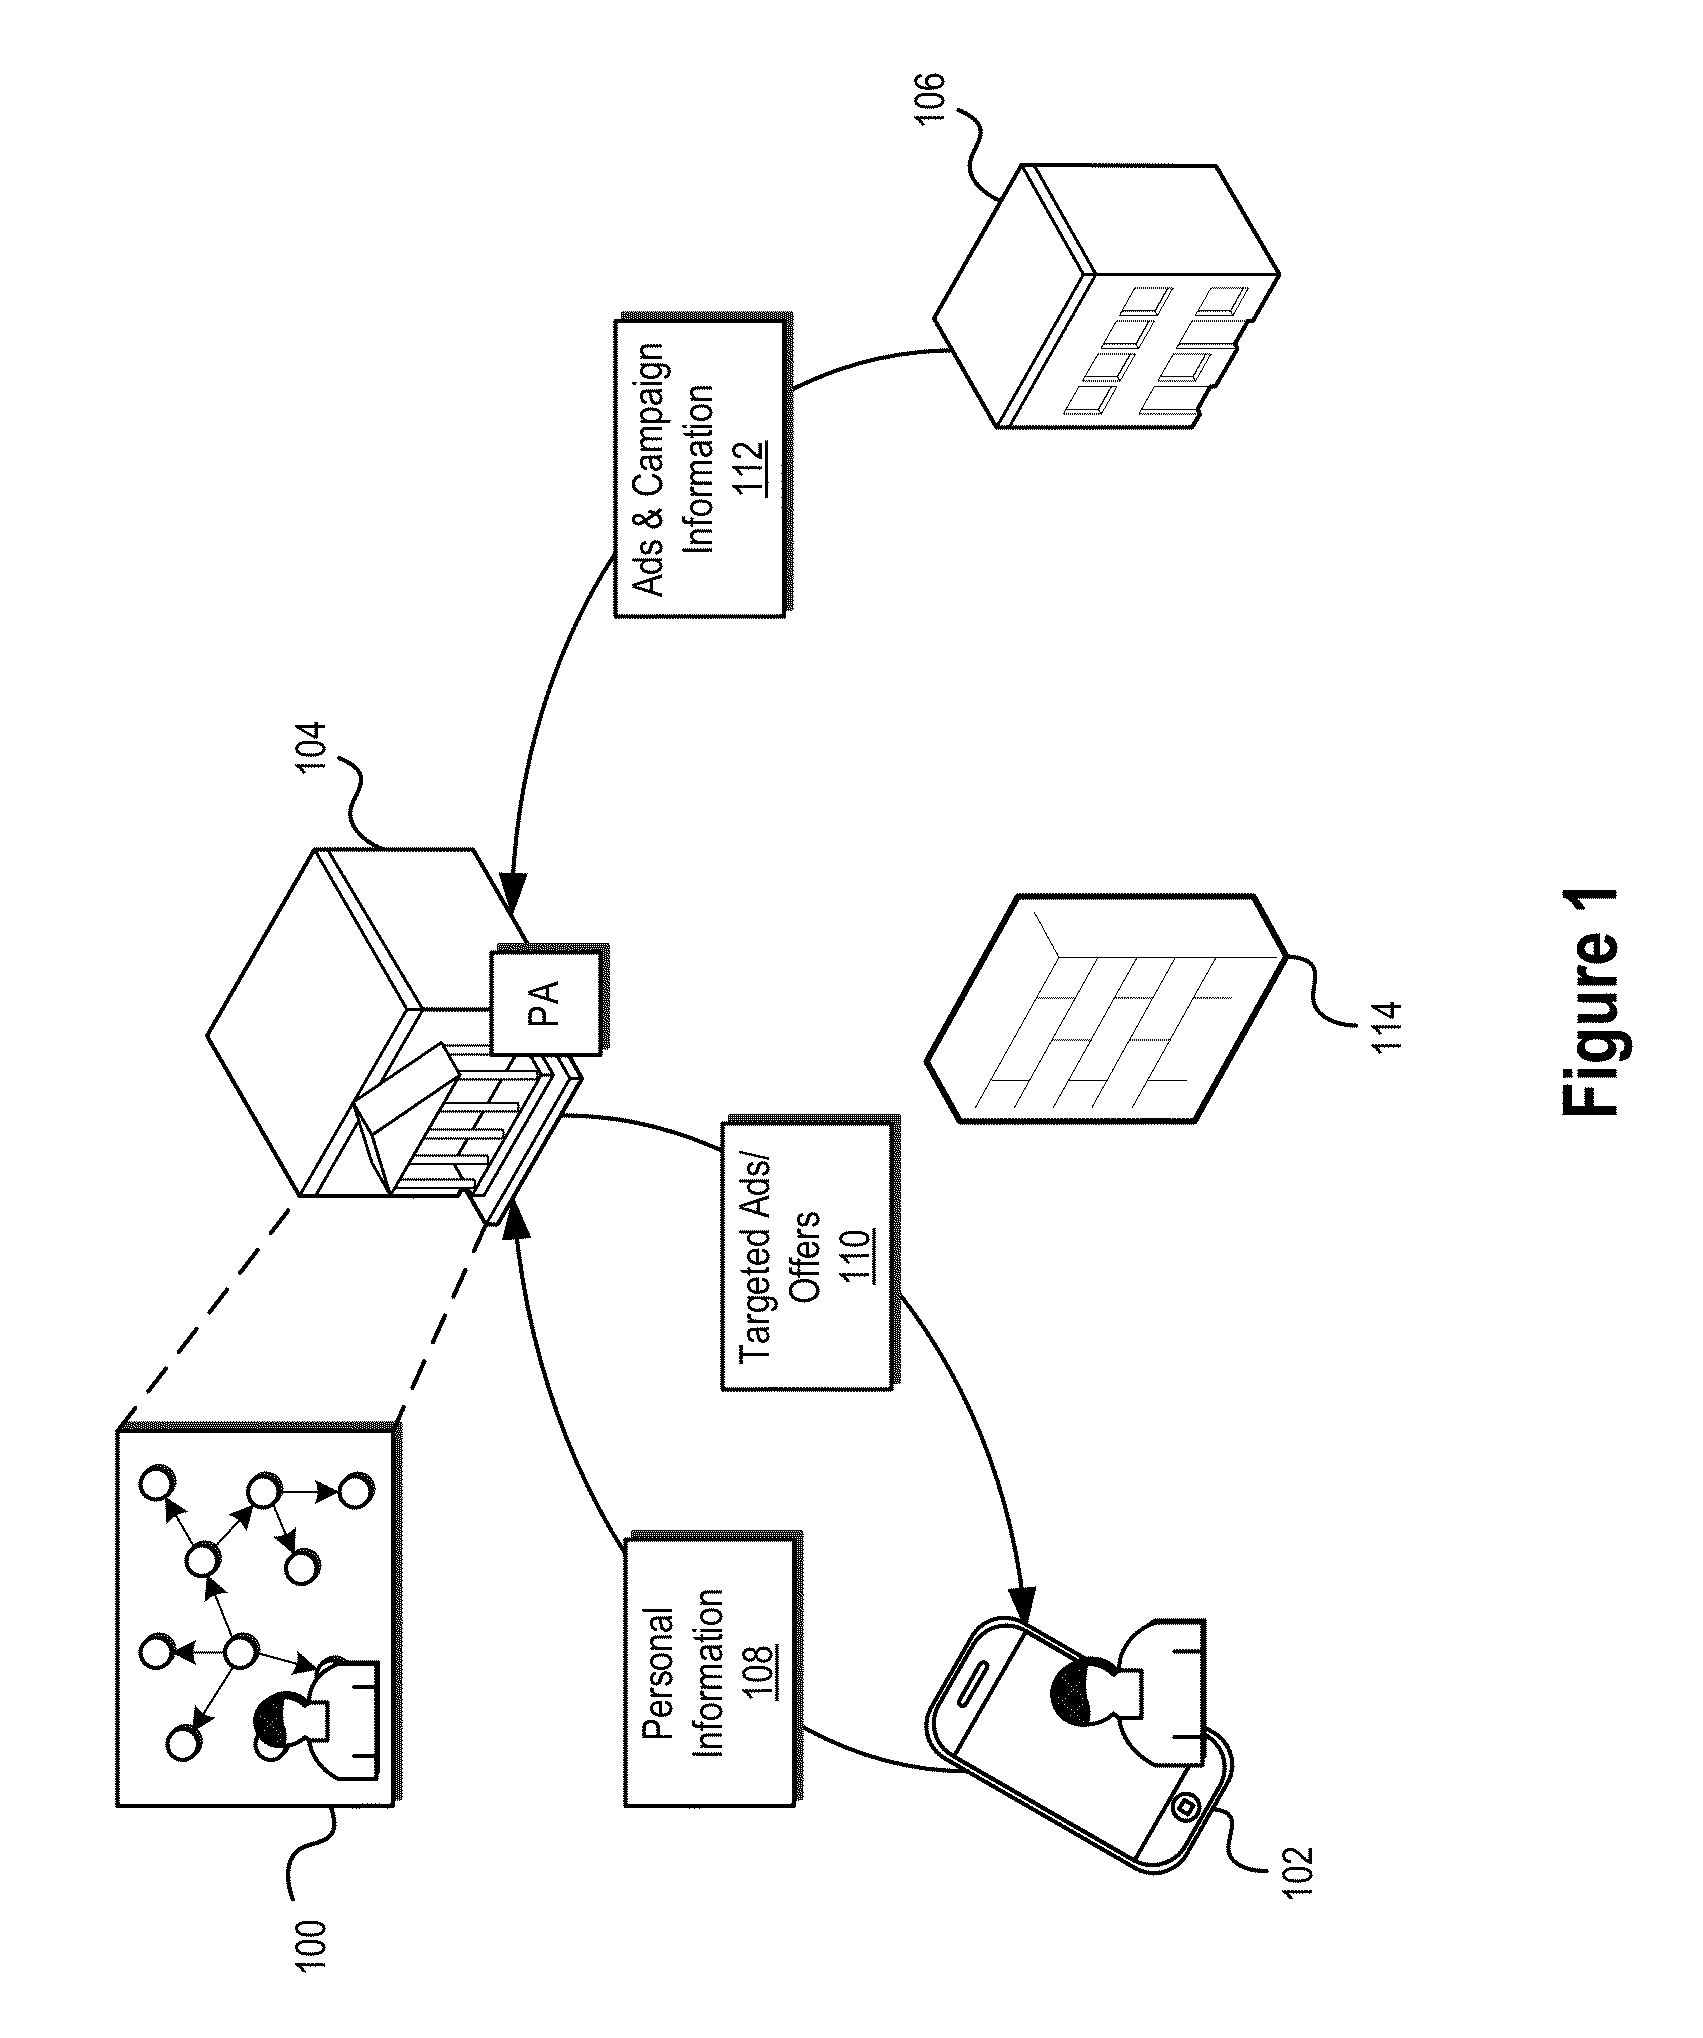 Information targeting systems and methods